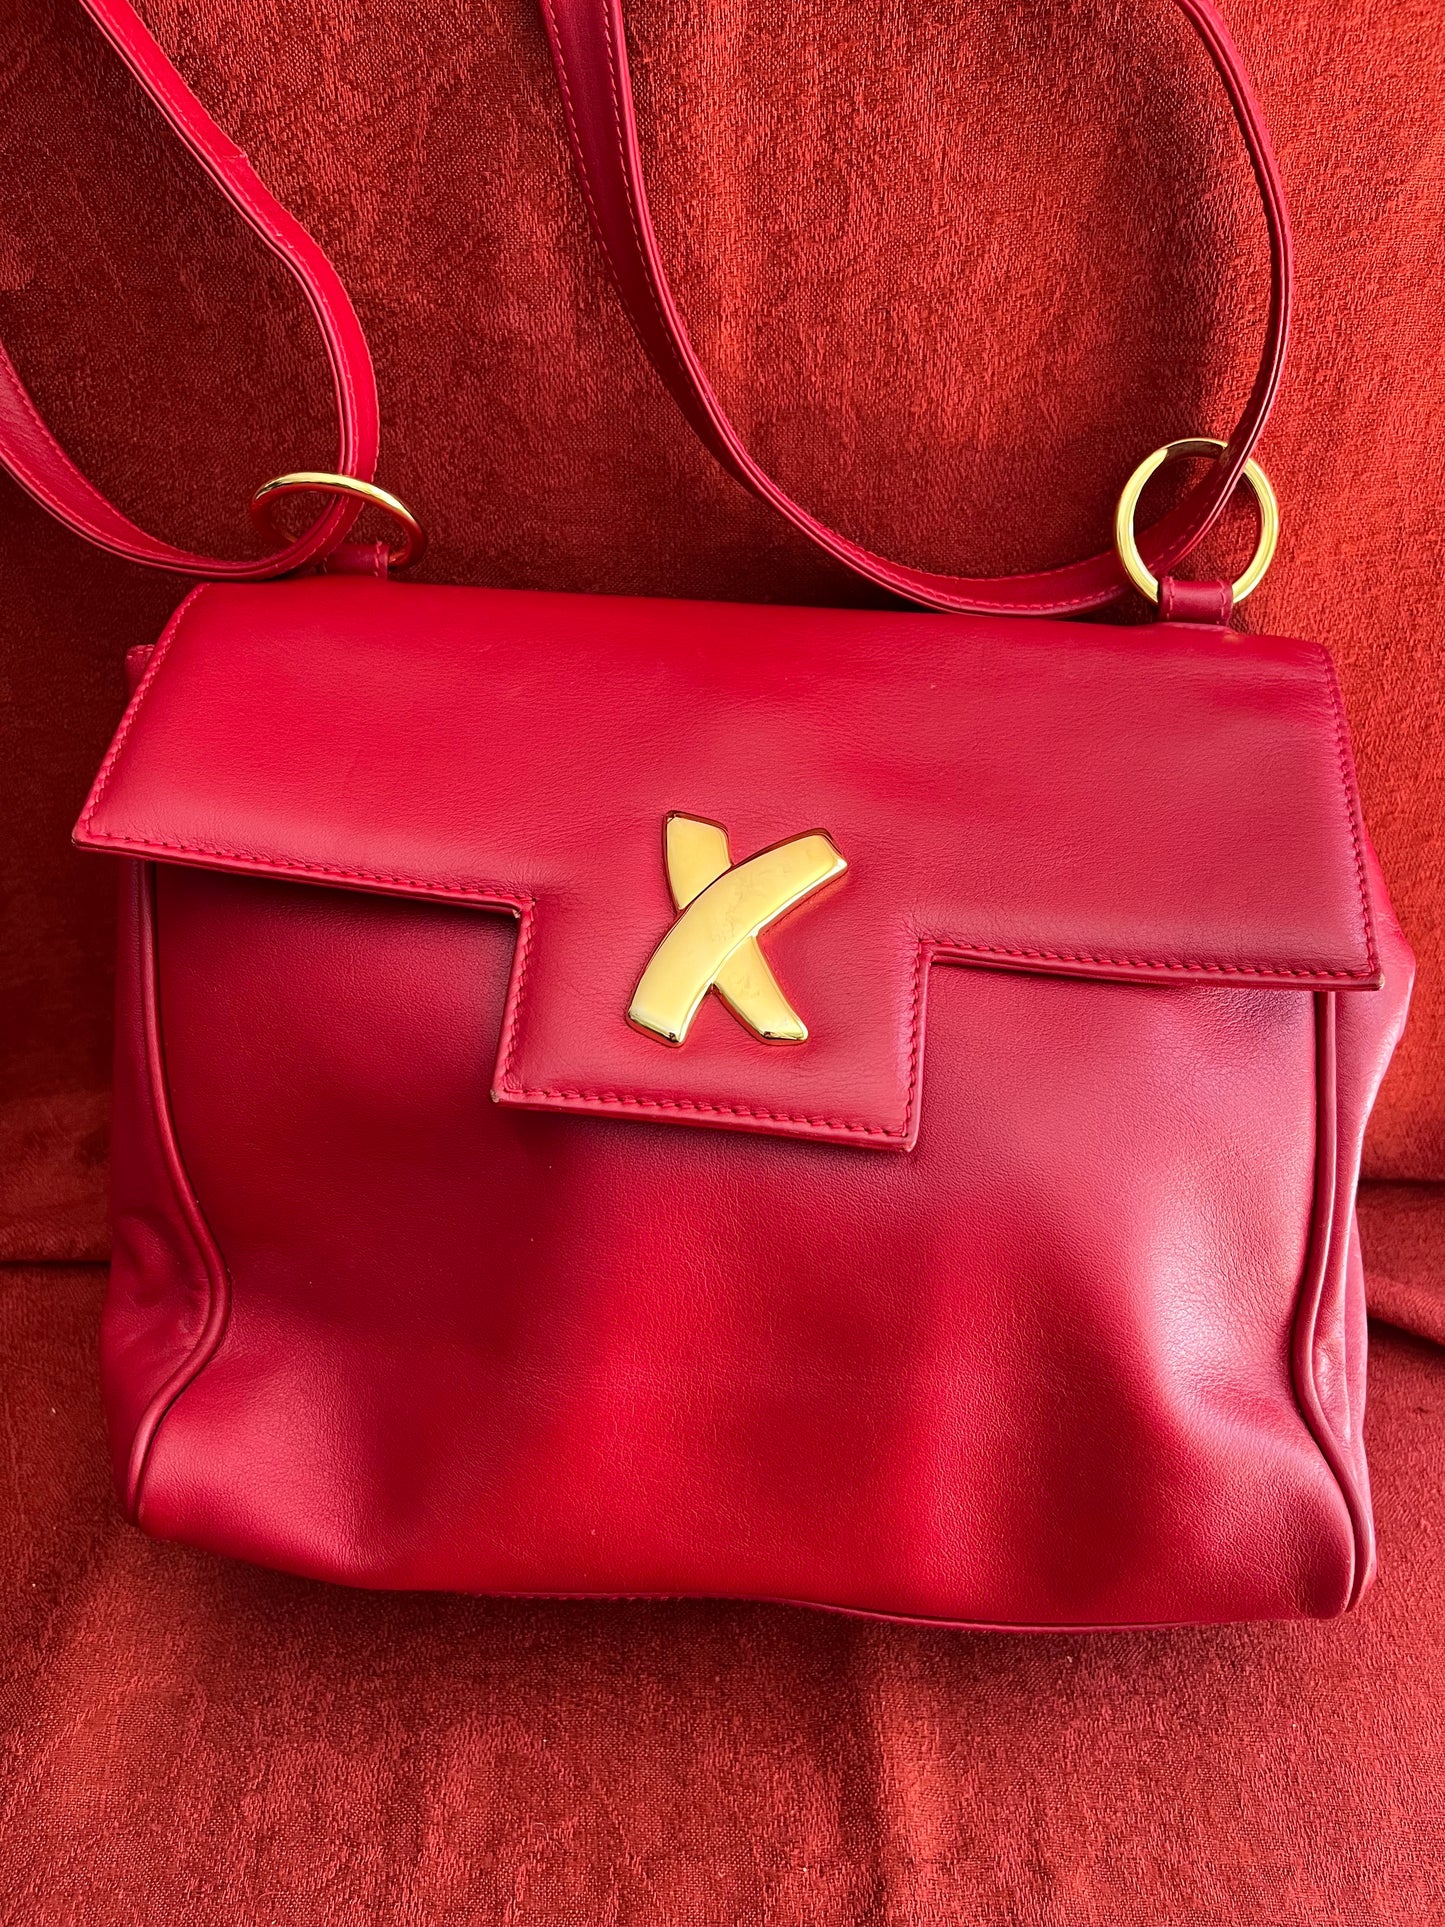 Vintage "By Paloma Picasso" Red Leather Handbag